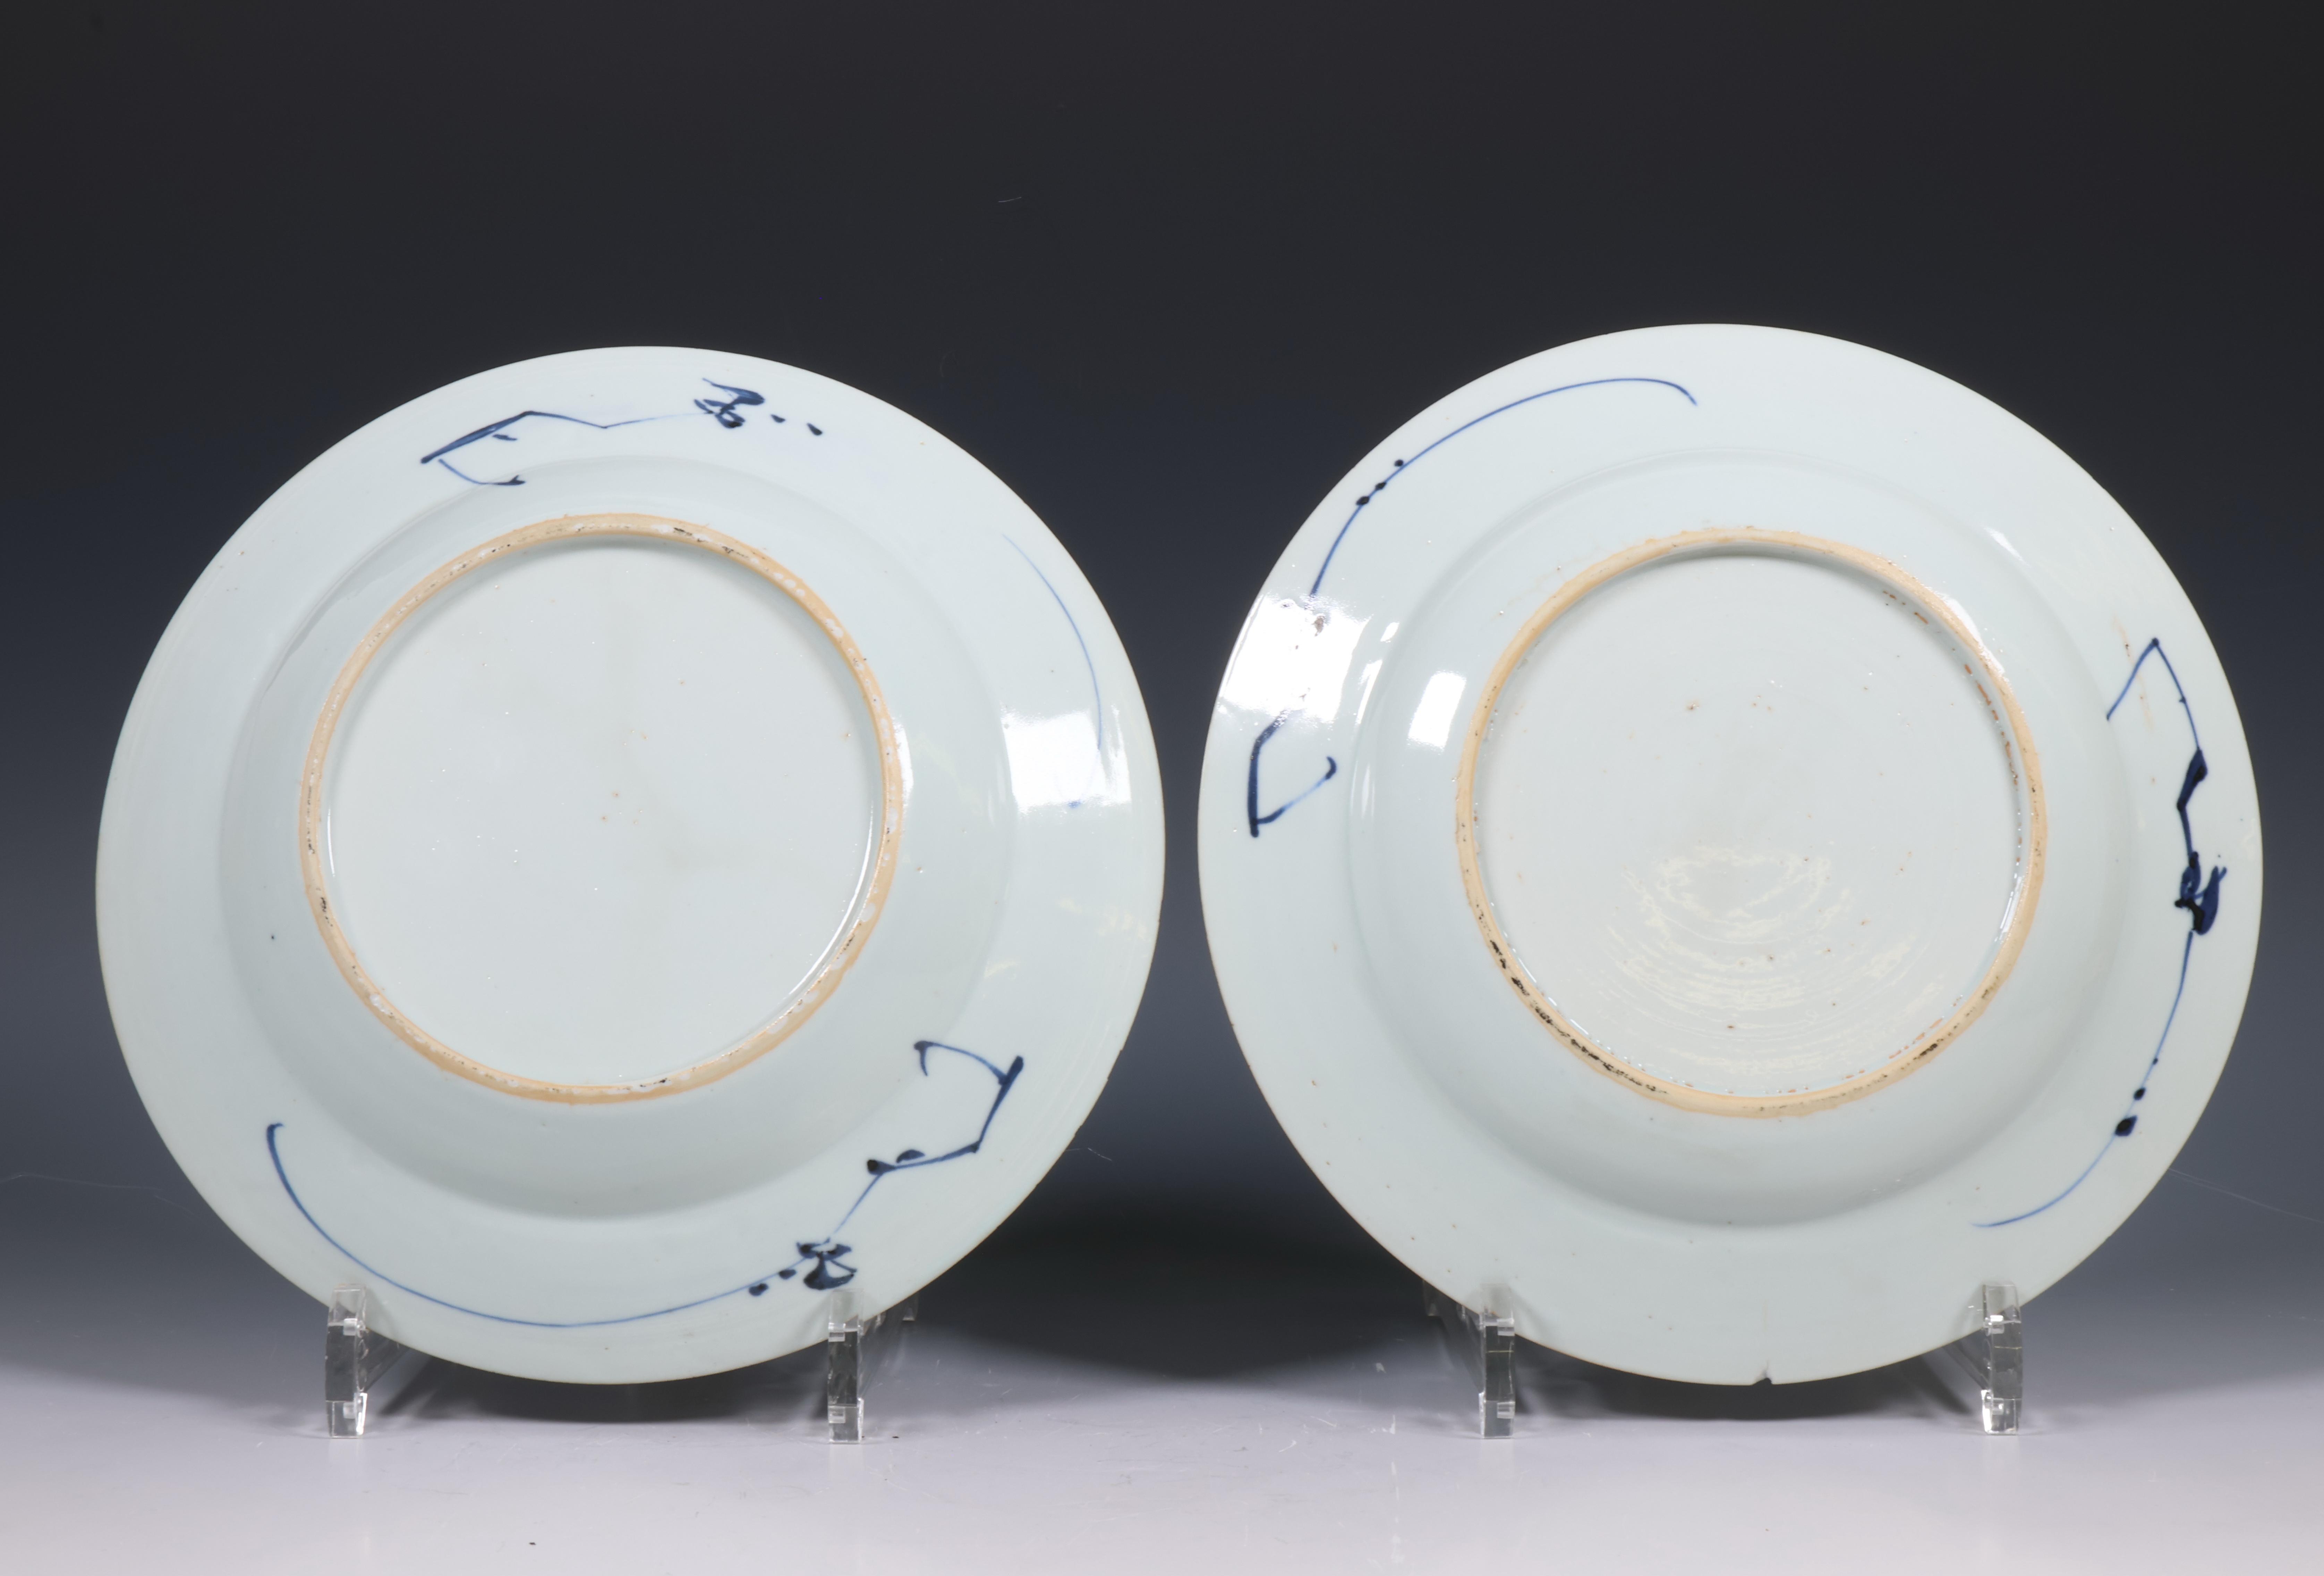 China, pair of blue and white porcelain plates, Qianlong period (1736-1795), - Image 3 of 3